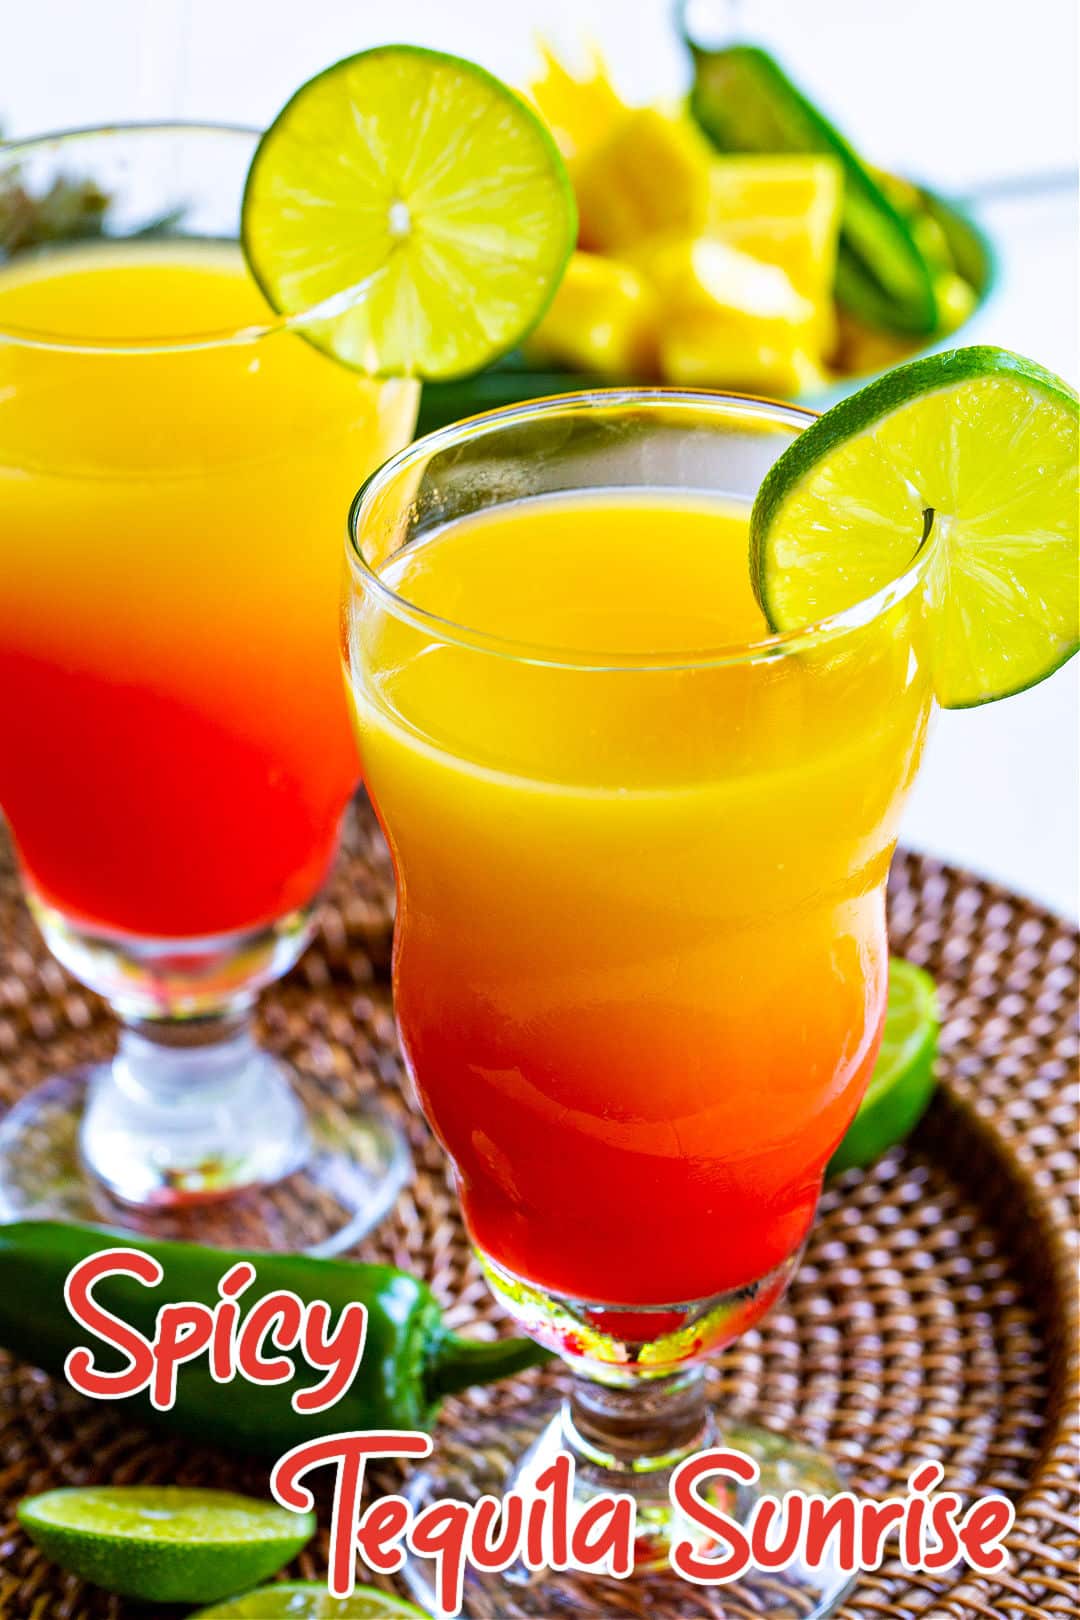 Spicy Tequila Sunrise in cocktail glasses.